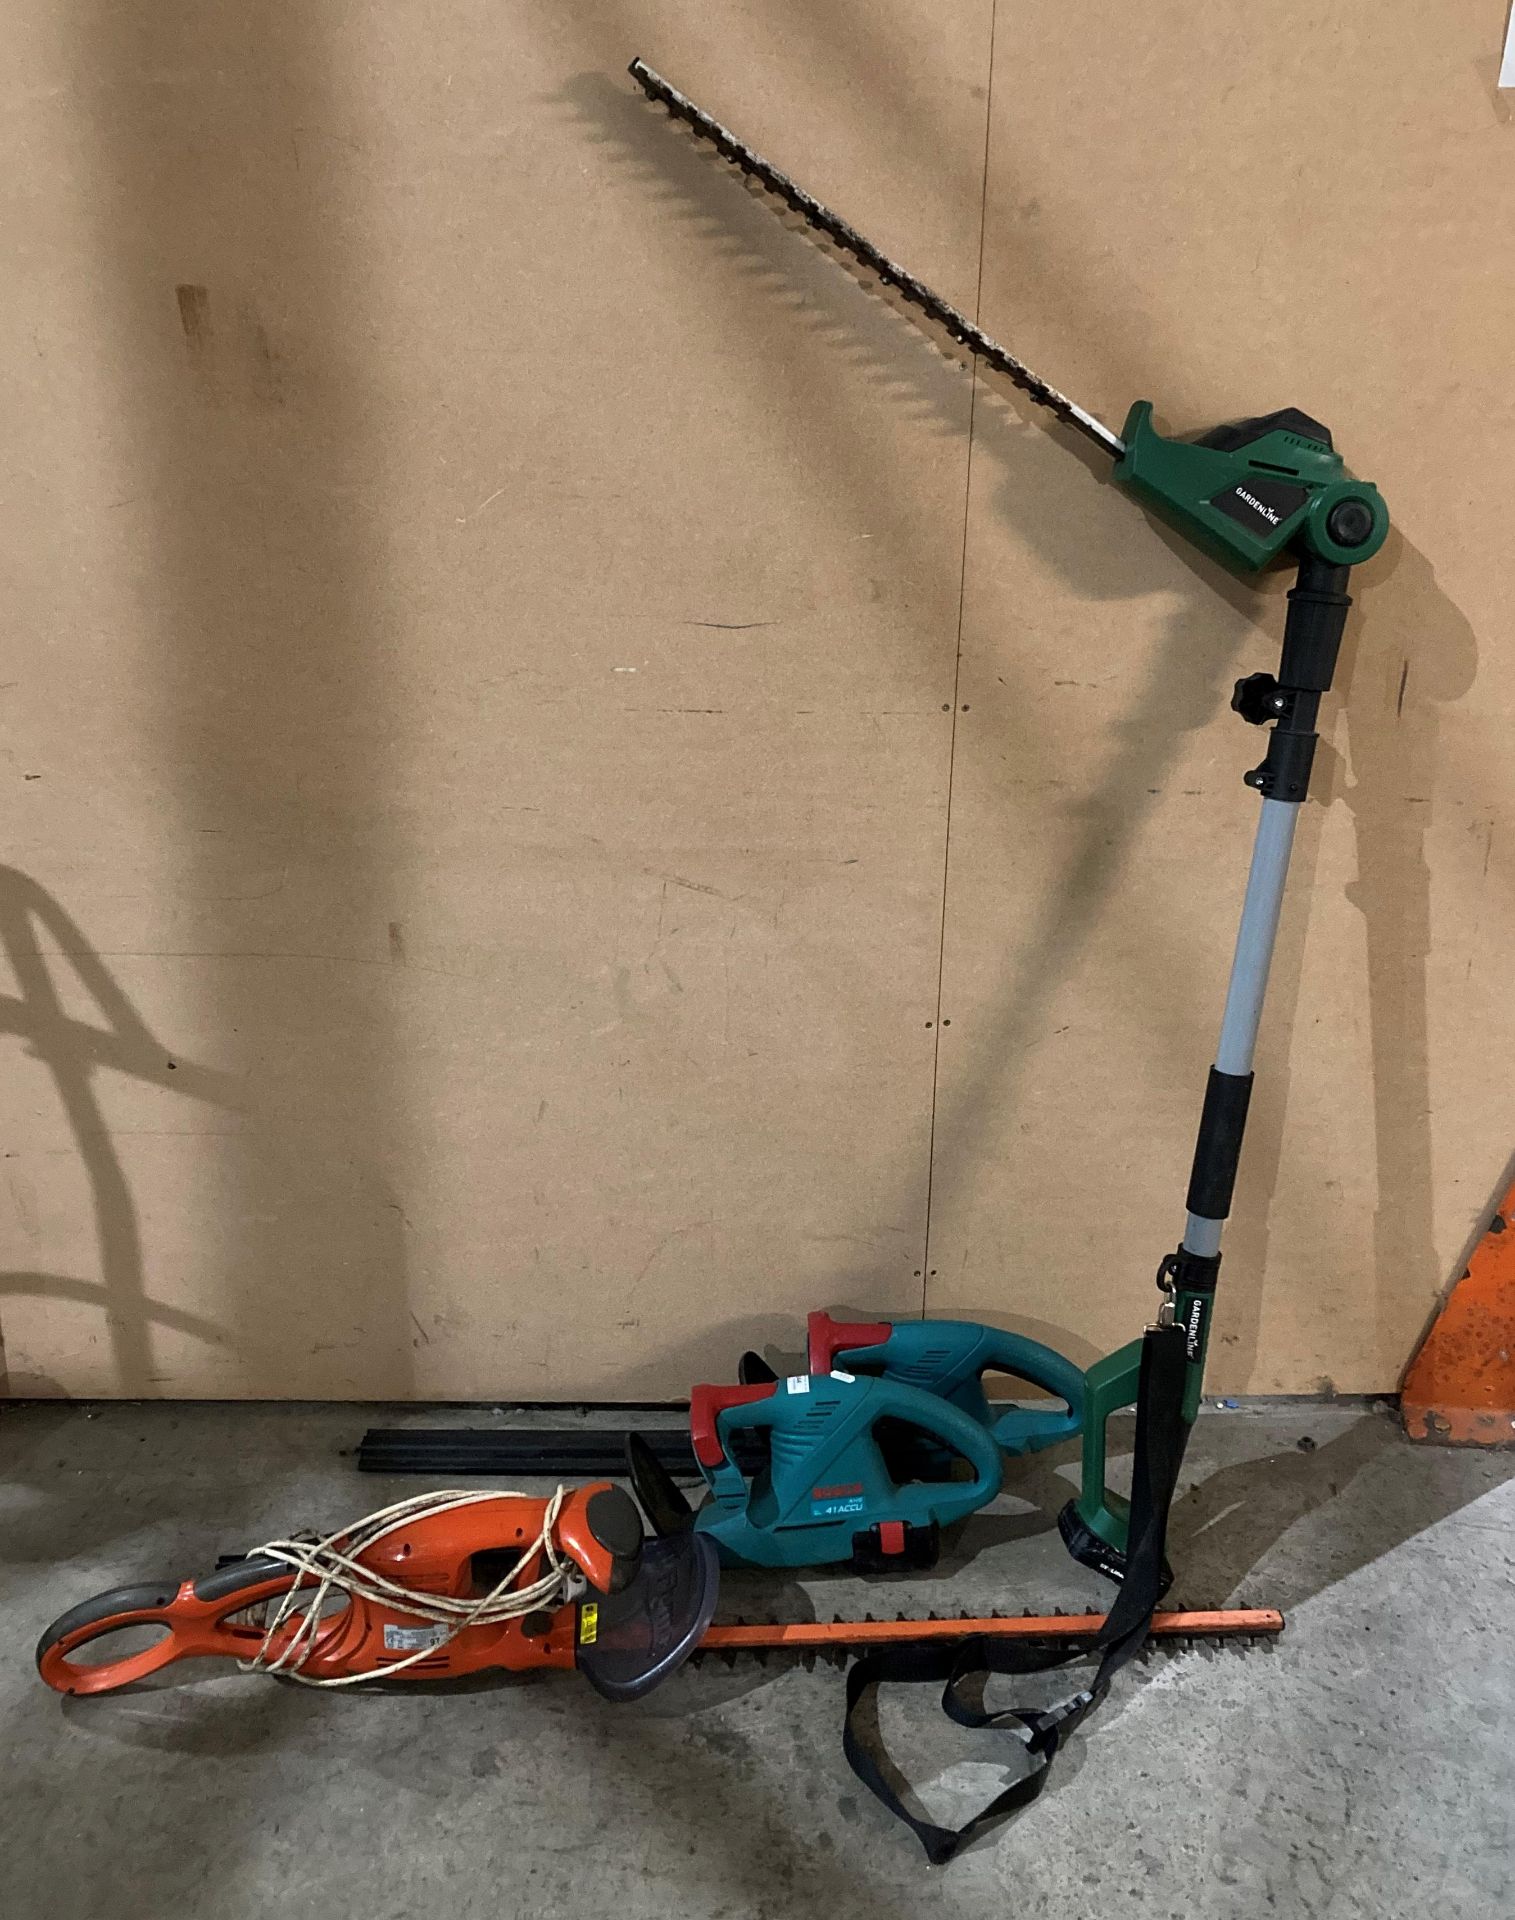 4 x Hedge trimmers - 2 x 240v (no chargers, not tested) and 2 x battery-powered (no charger,